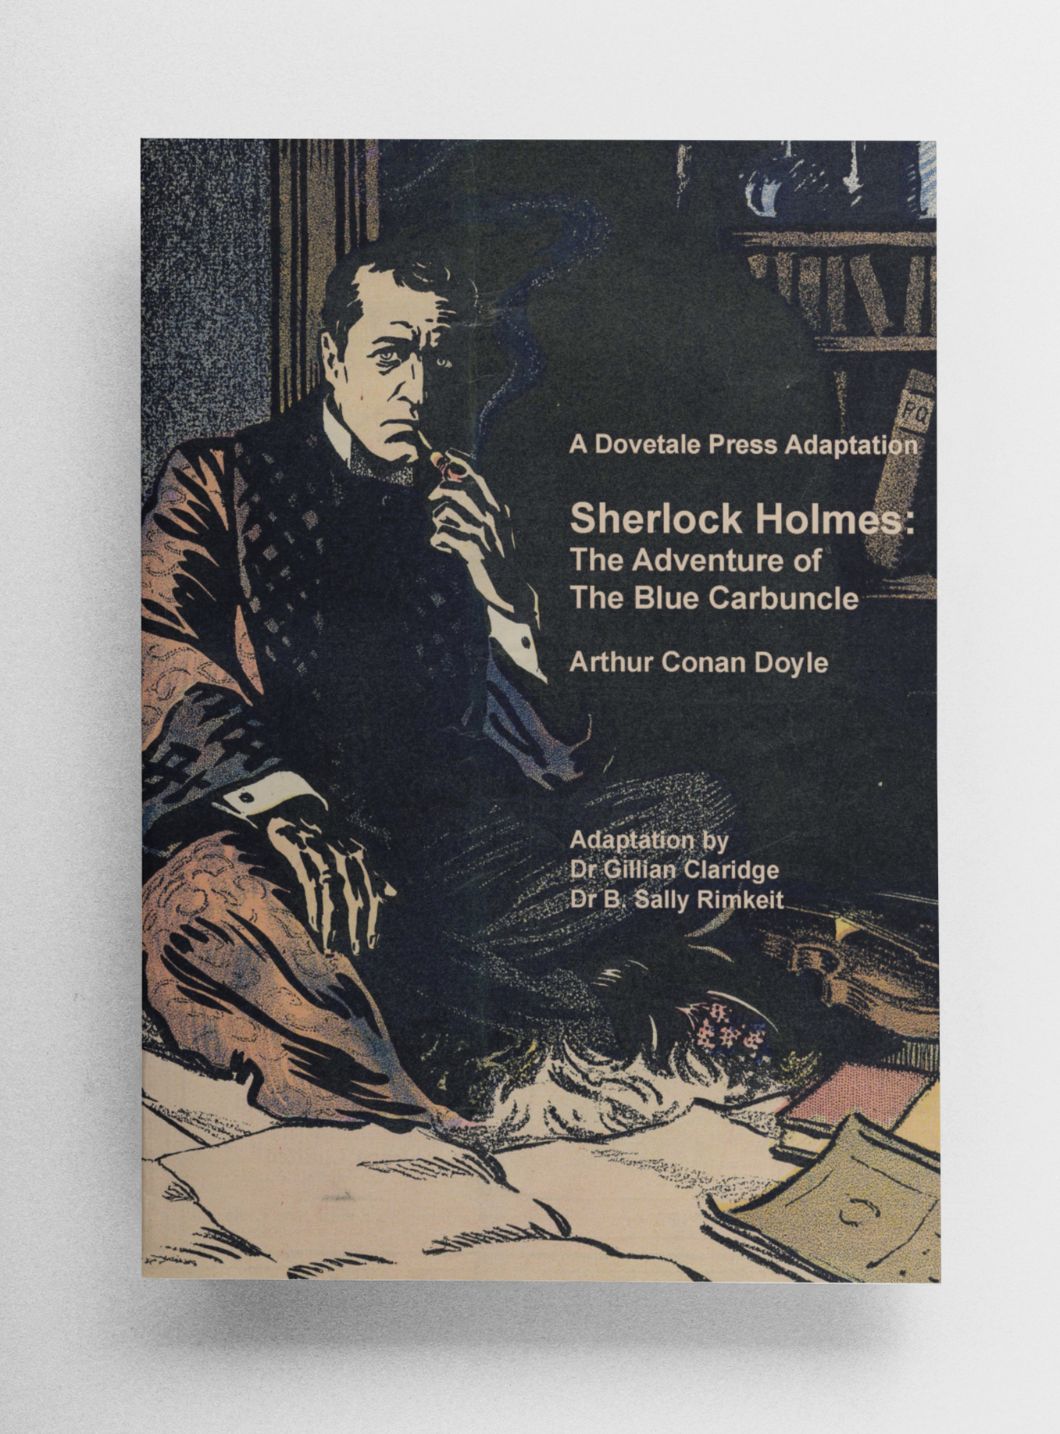 Cover of a Dovetale Press adaptation of The Adventure of the Blue Carbuncle by Arthur Conan Doyle. Adapted by Dr. Gillian Claridge and Dr. B. Sally Rimkeit